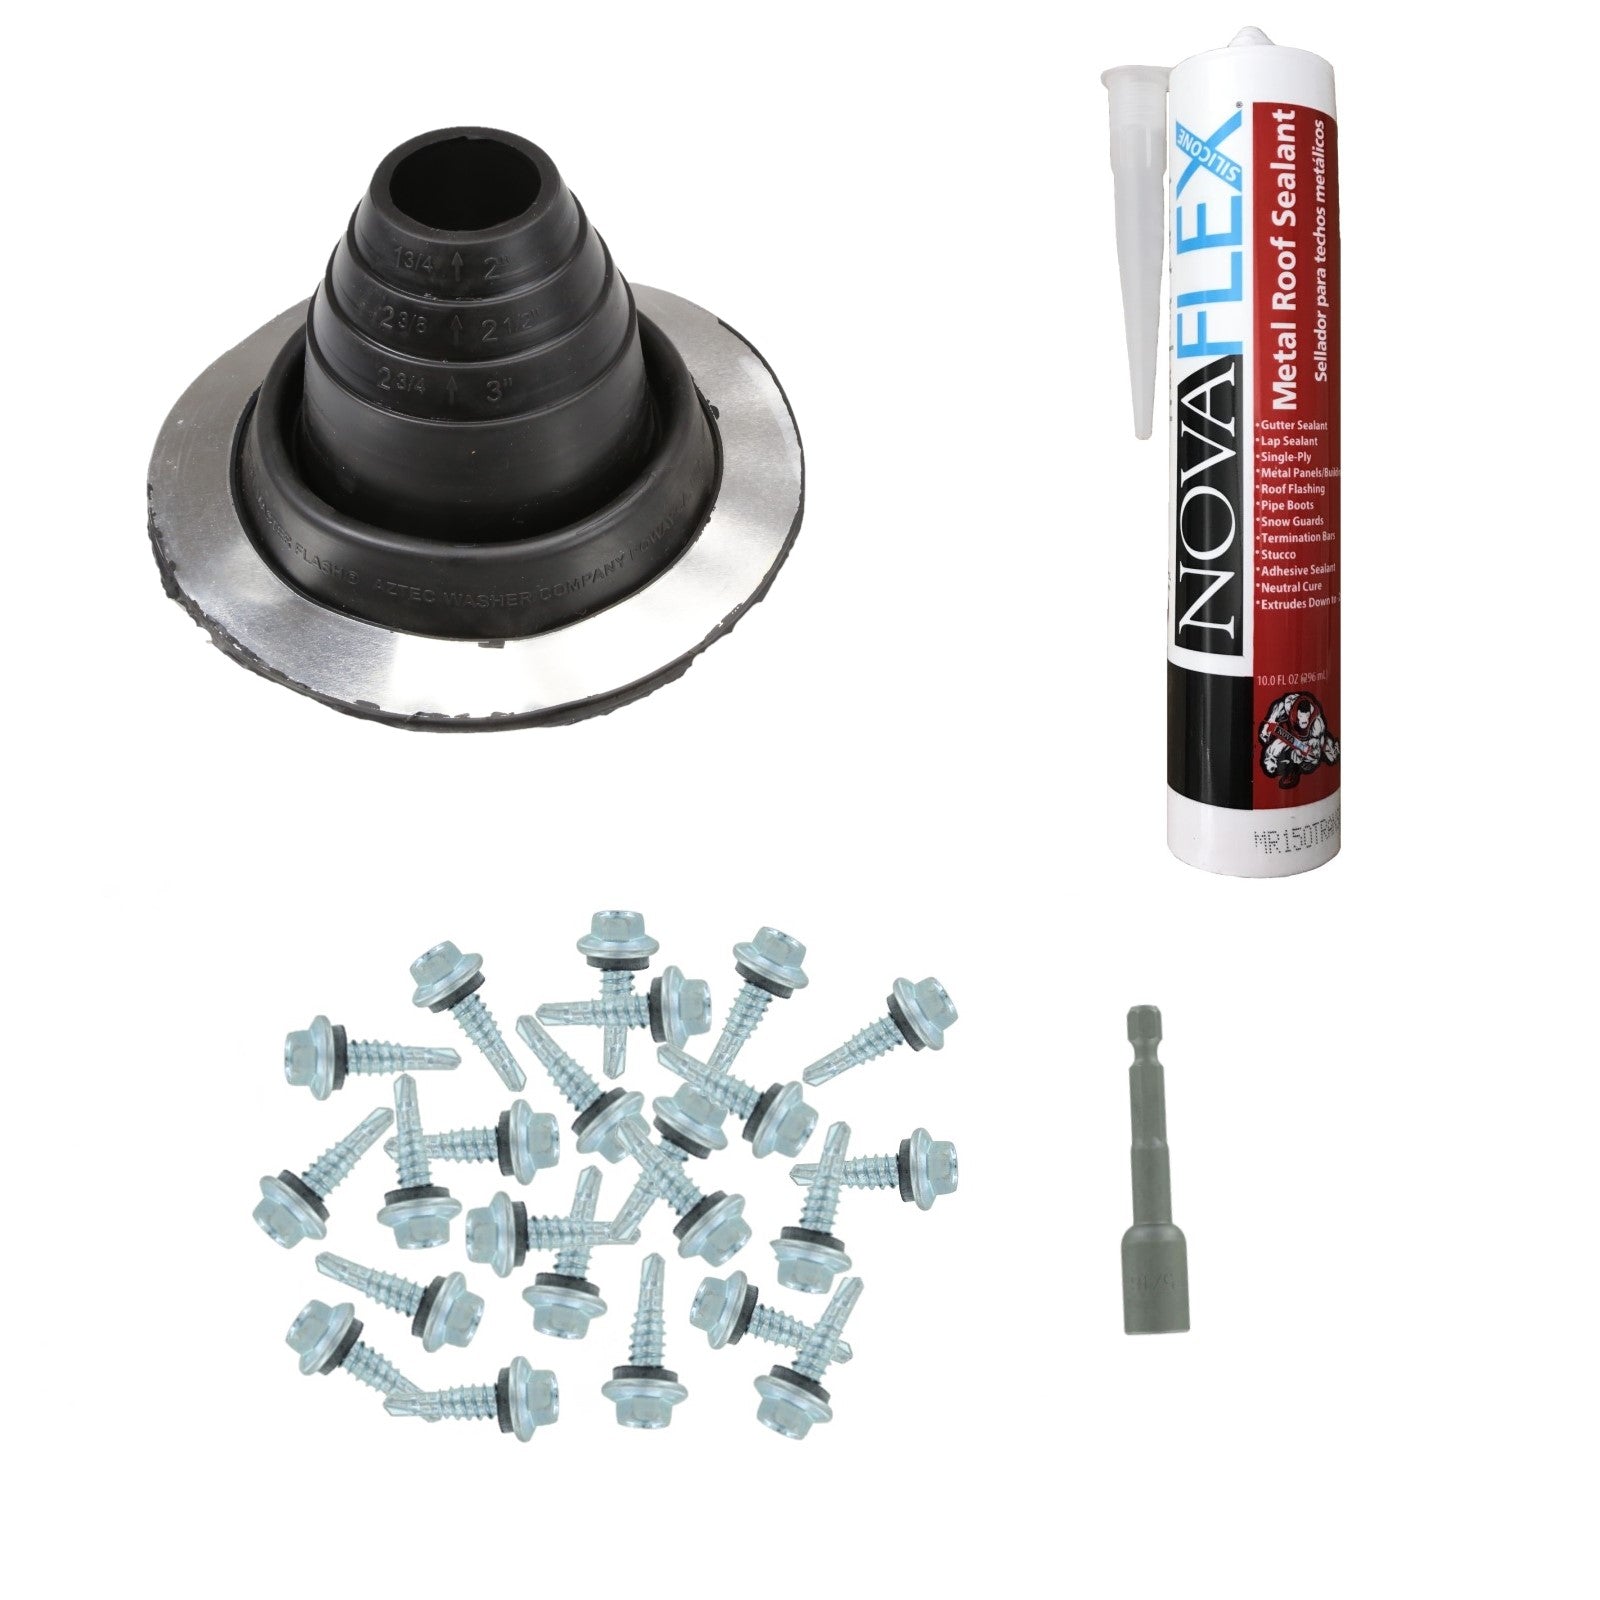 #2 Round EPDM Metal Roof Pipe Boot wInstall Kit Black